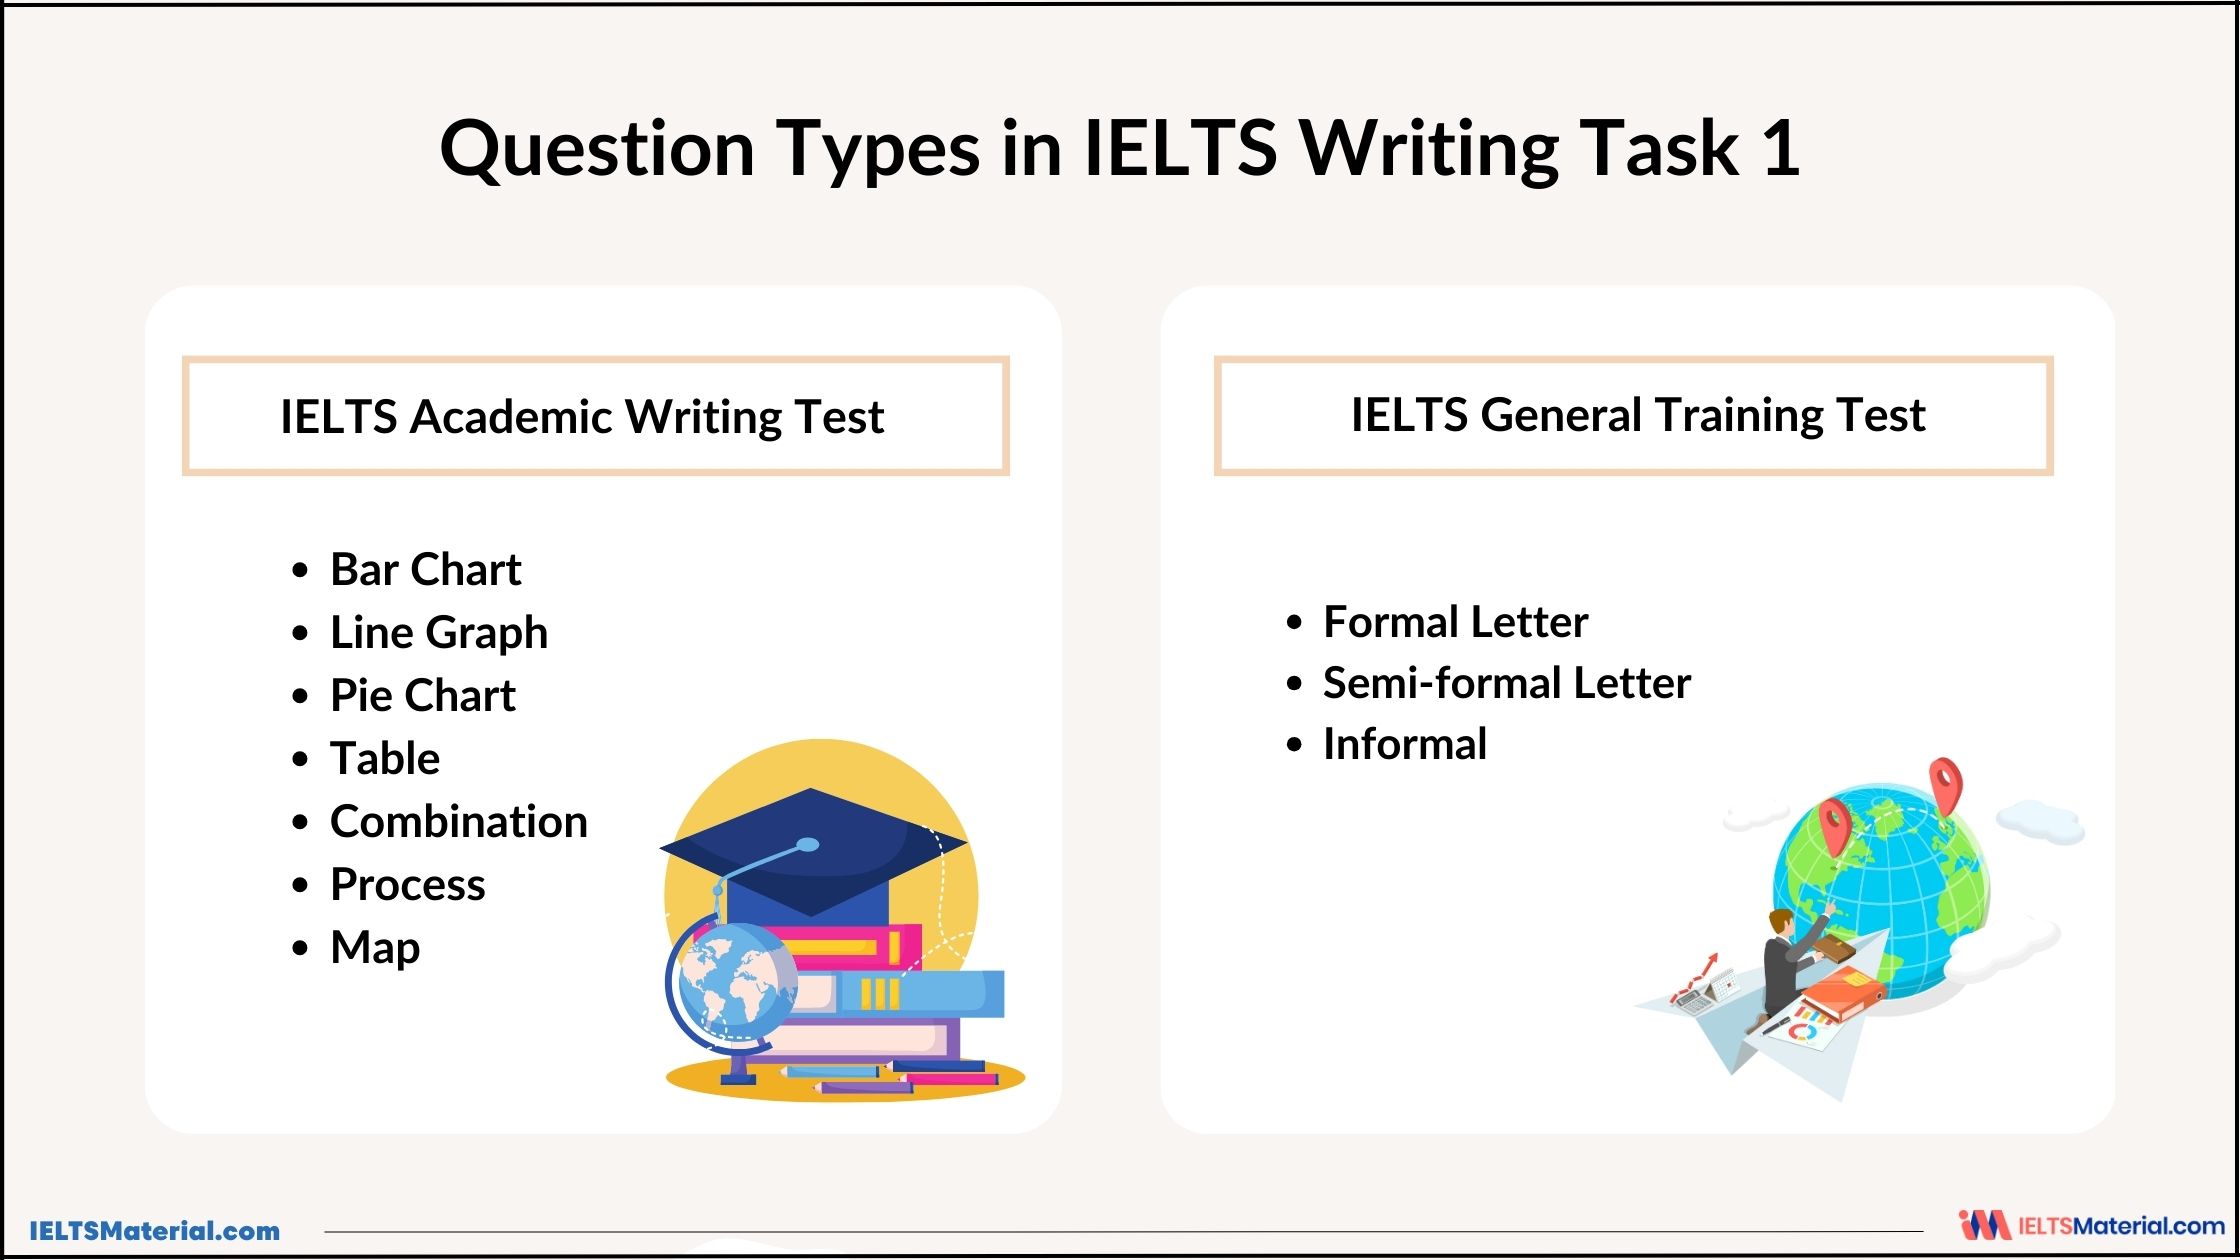 Question Types in IELTS Writing Task 1